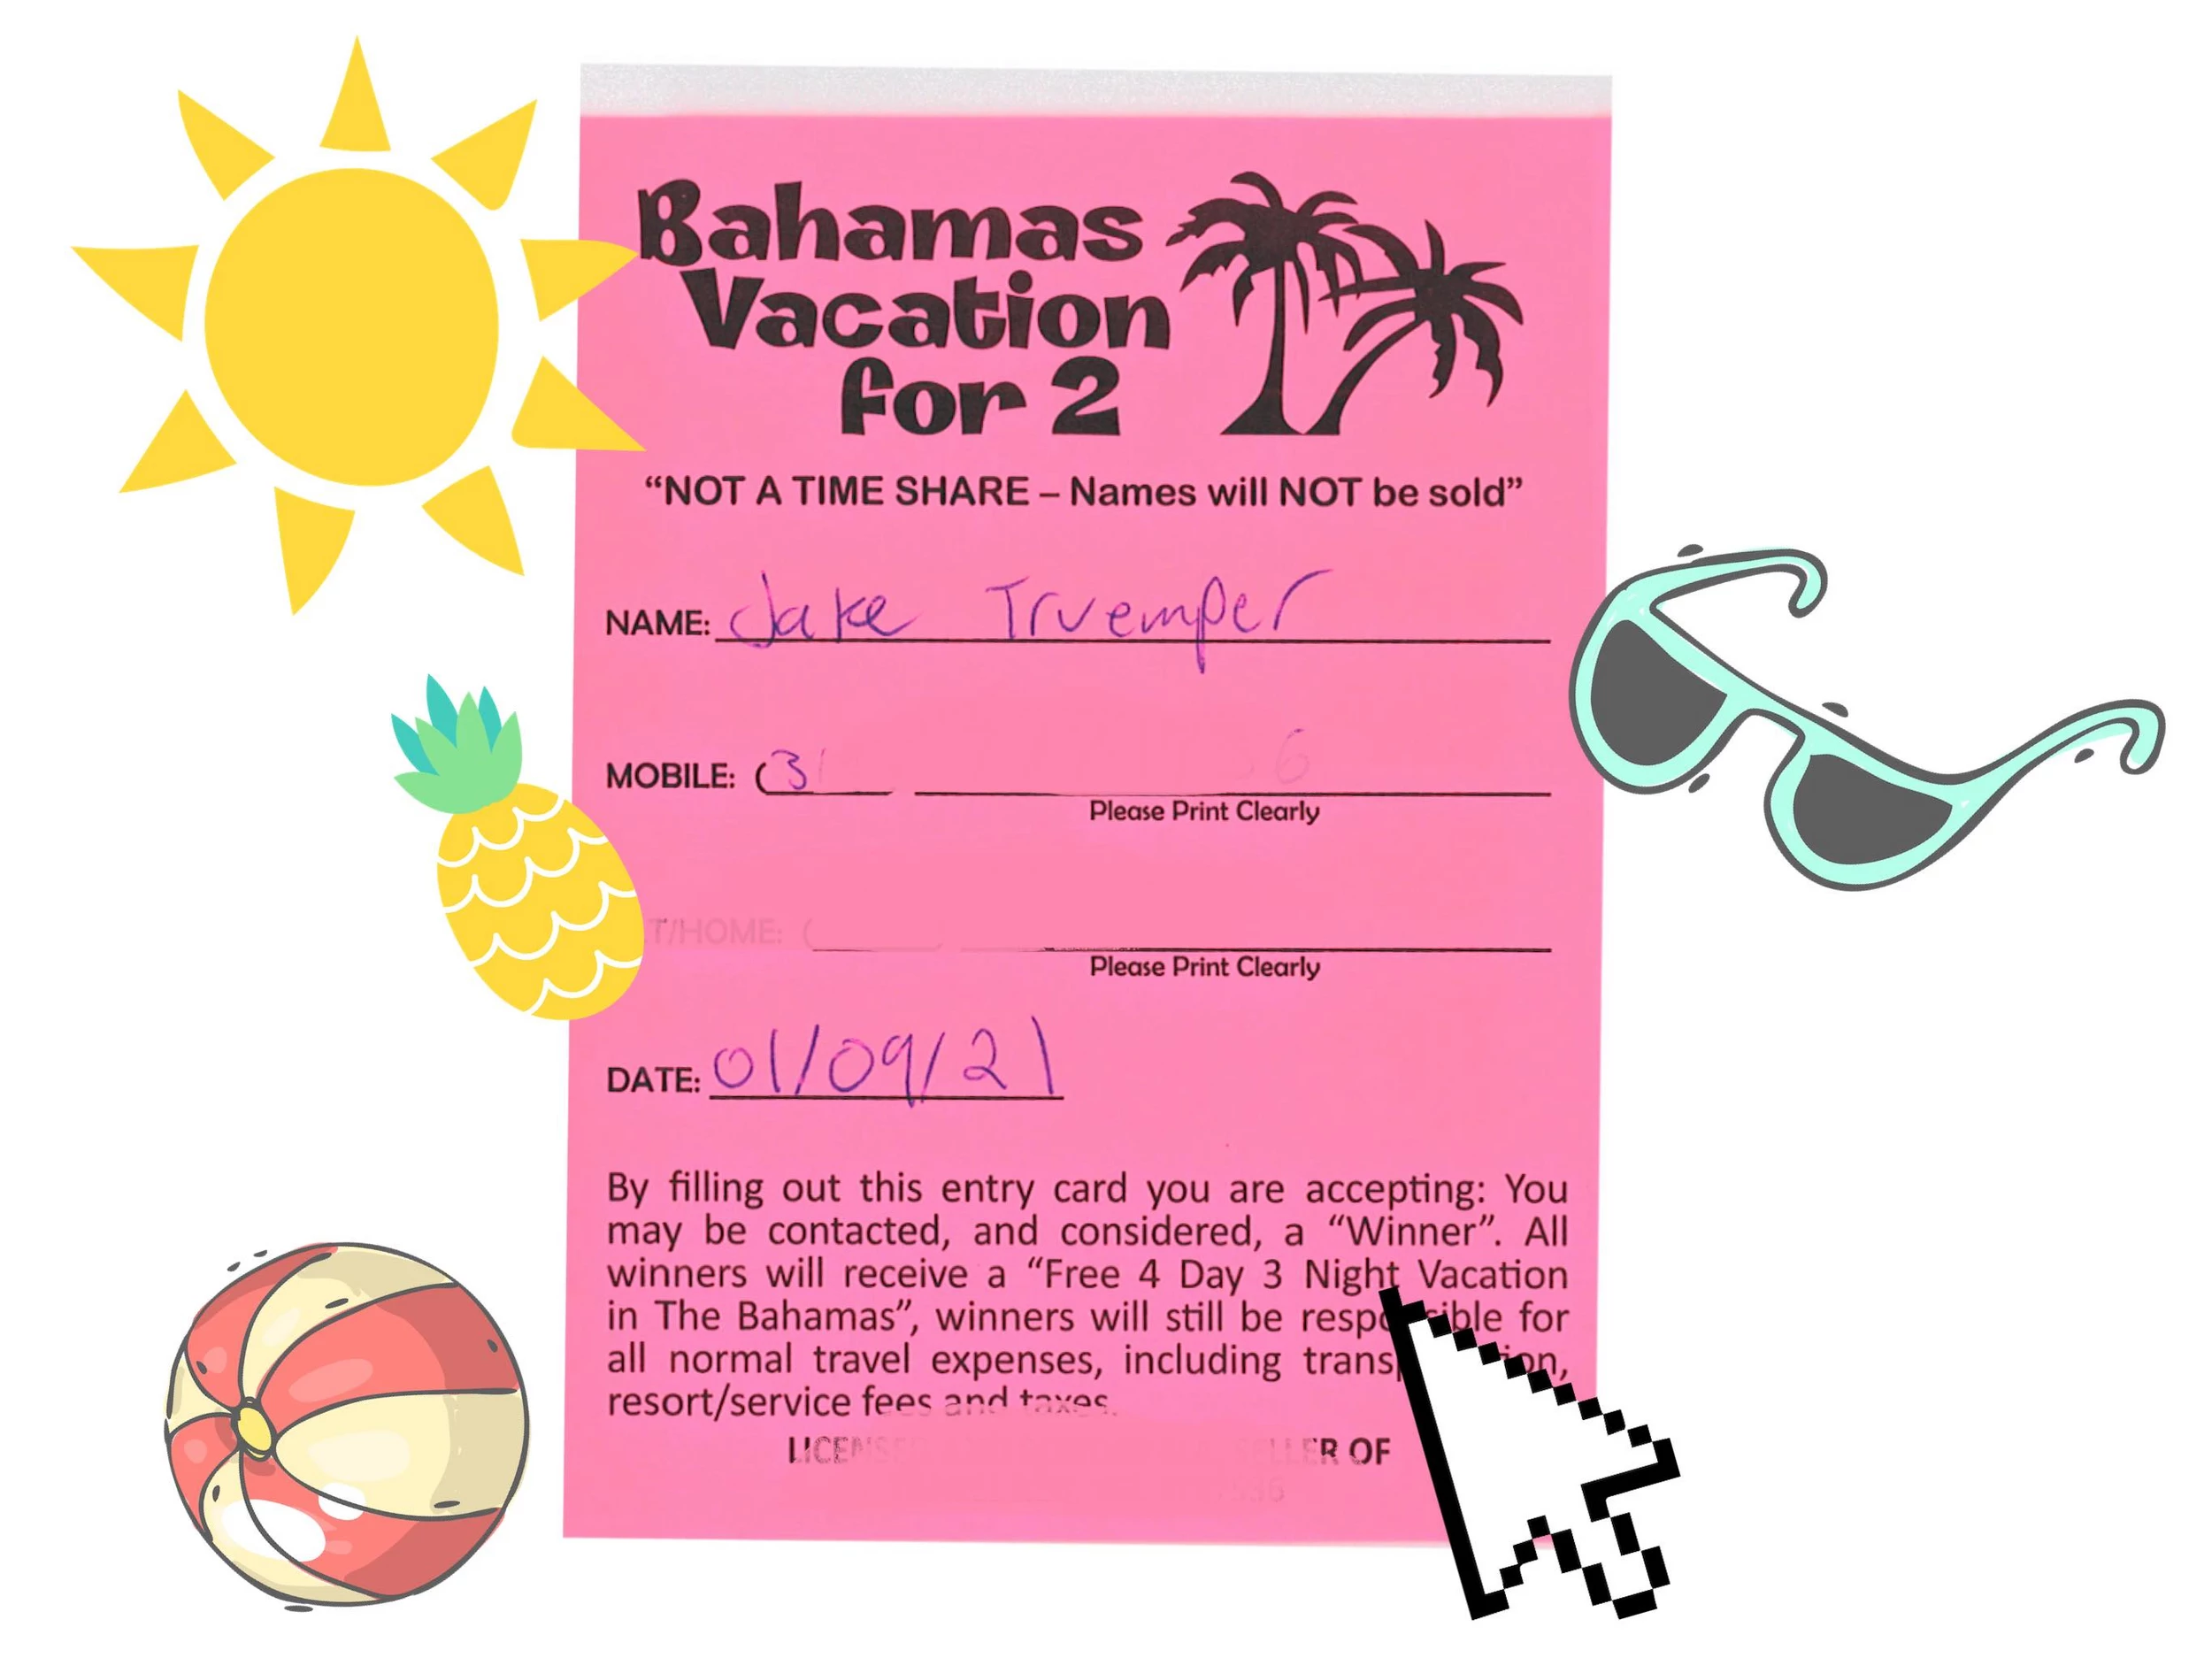 Are The “Free Trips To The Bahamas” Really Free?